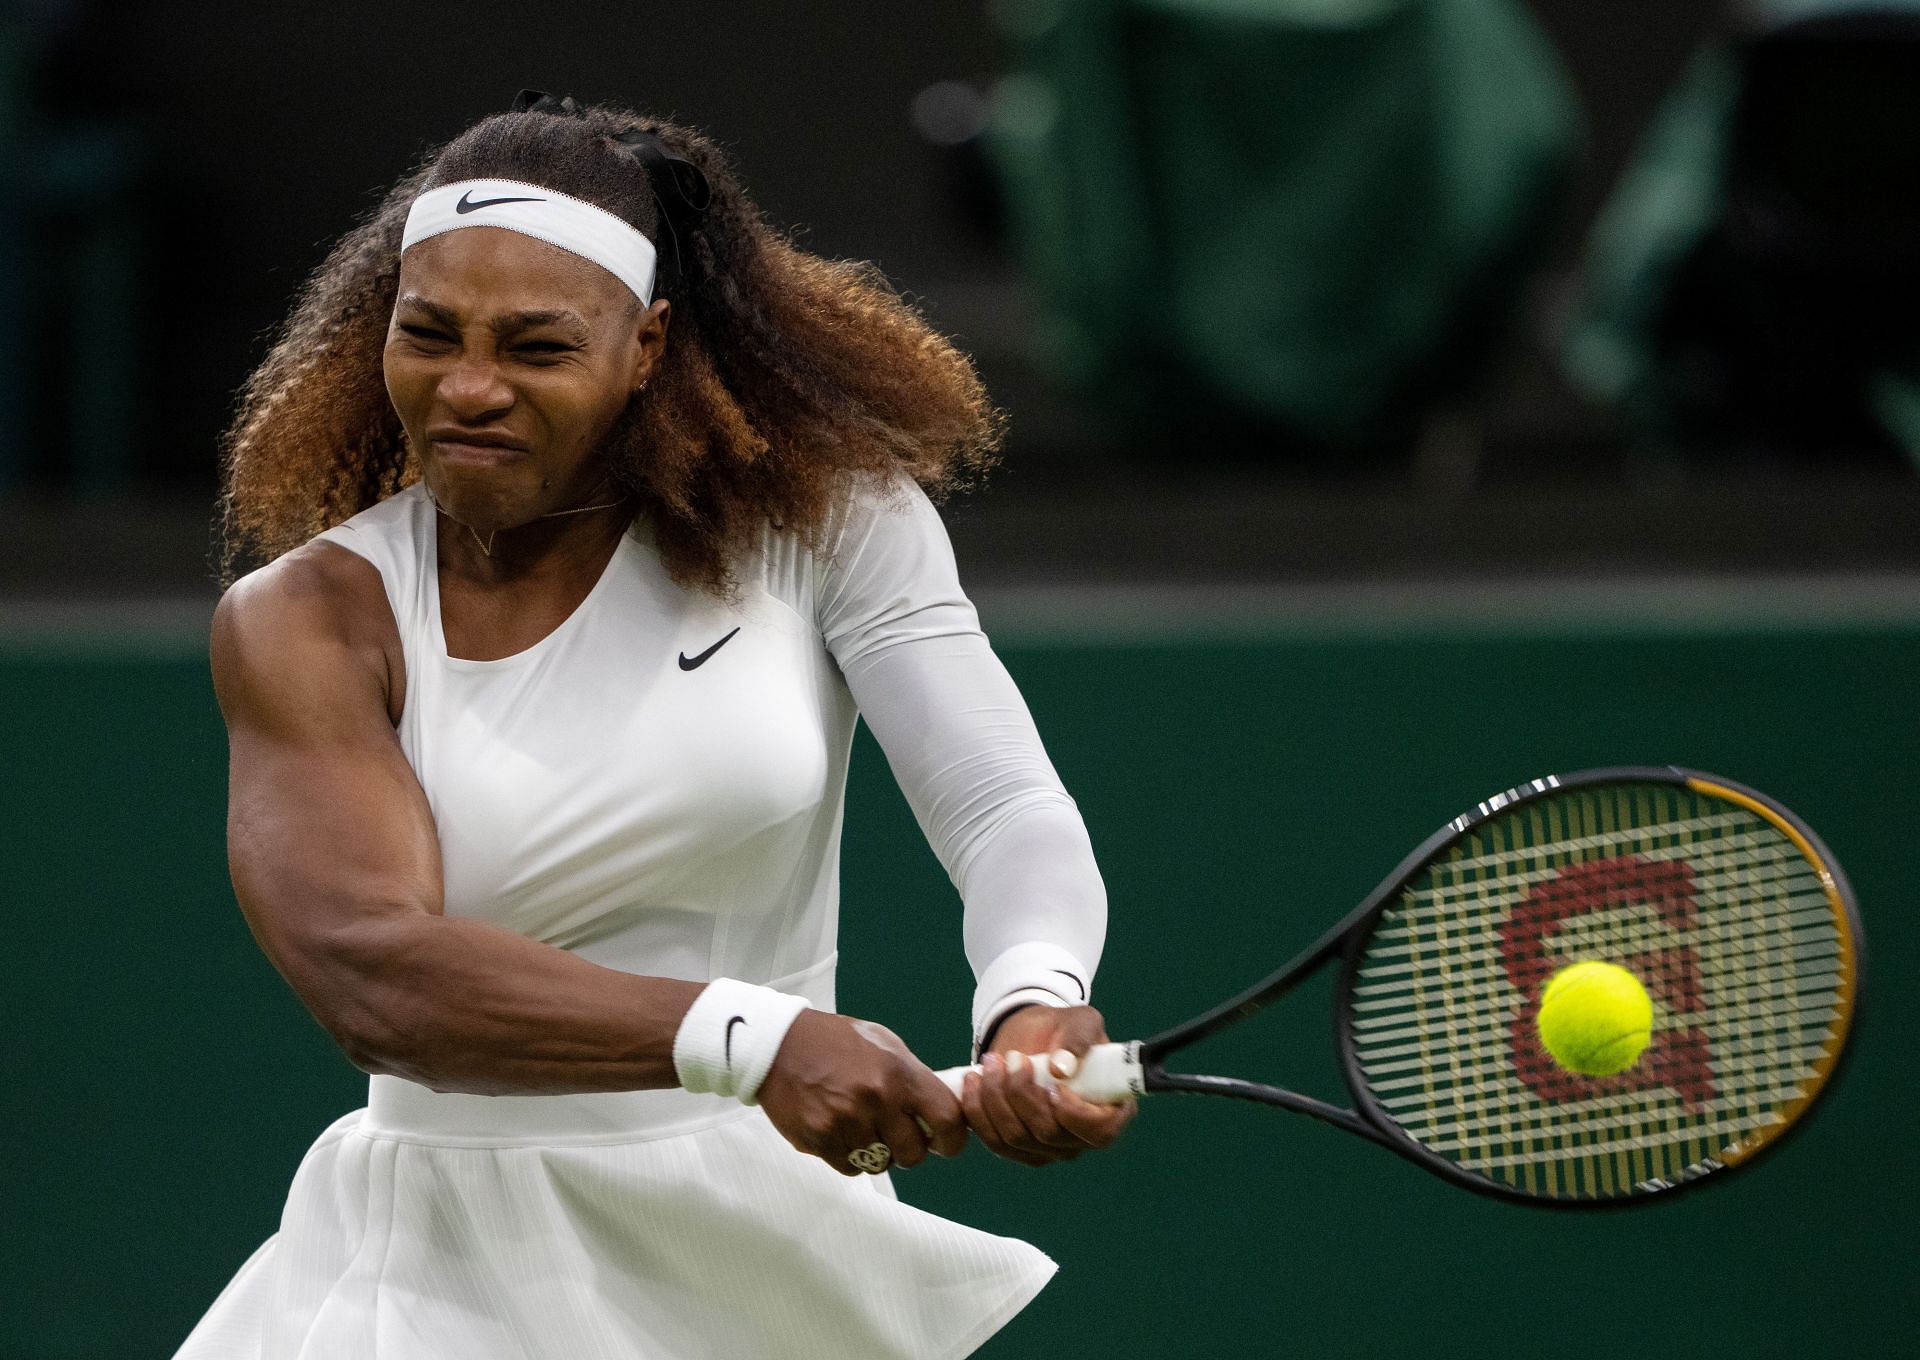 Serena Willimas has not played a competitive match since Wimbledon last year